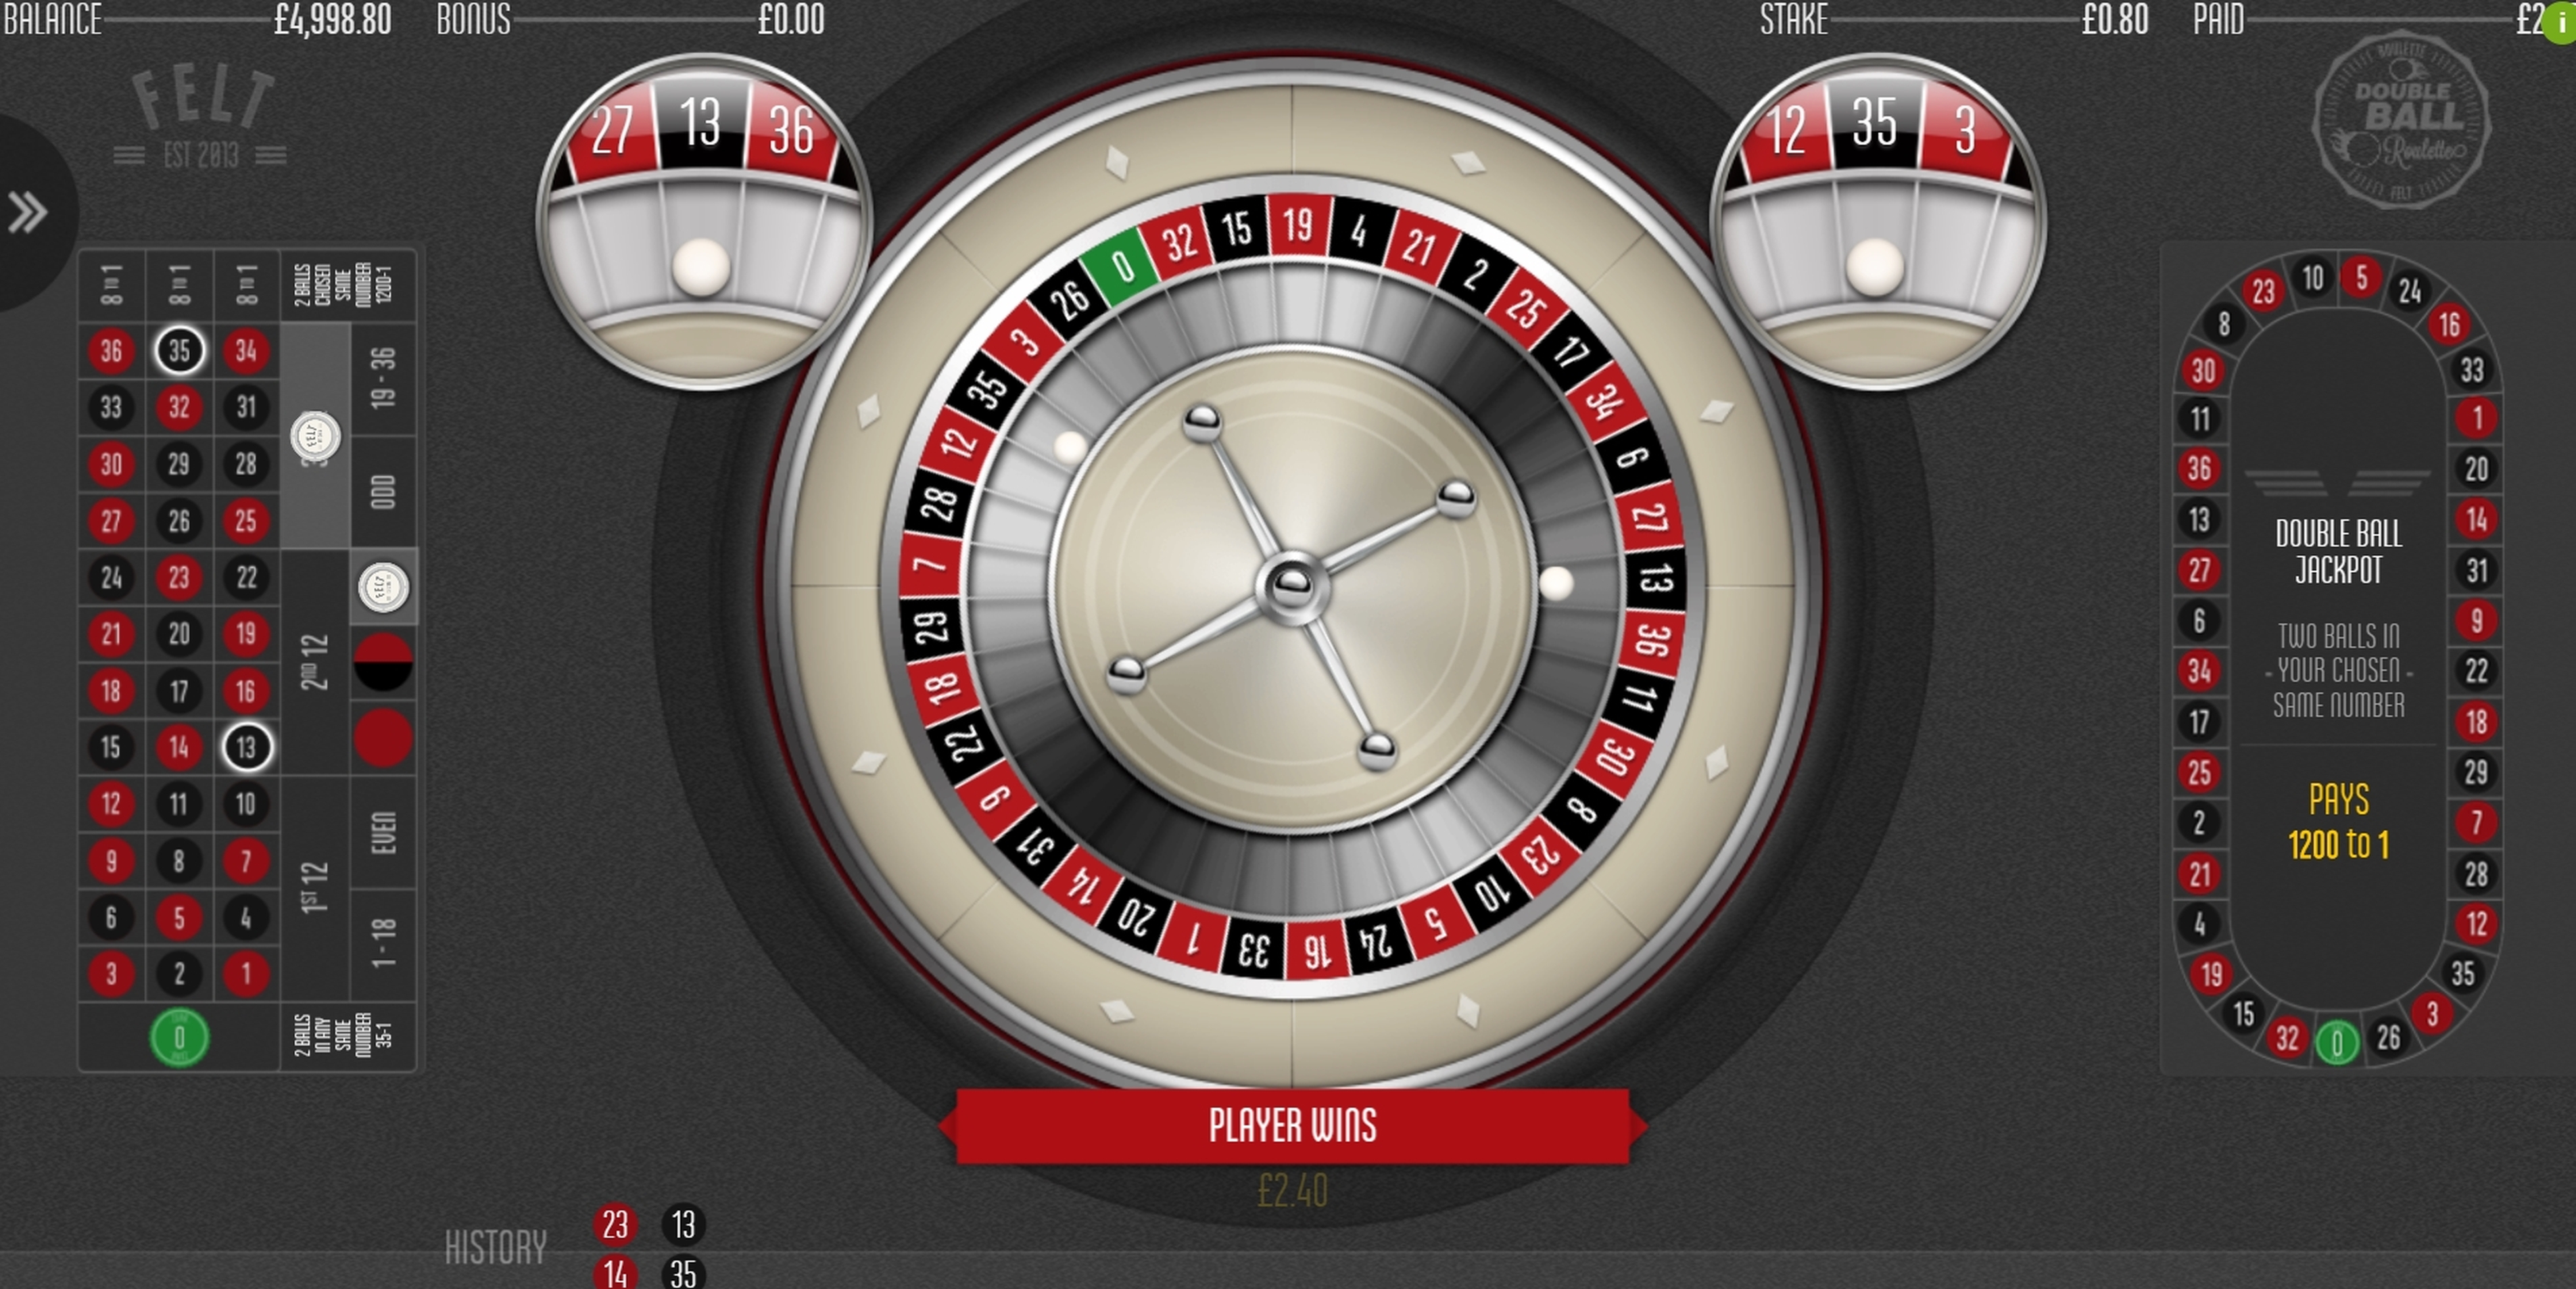 Win Money in Double Ball Roulette Free Slot Game by Felt